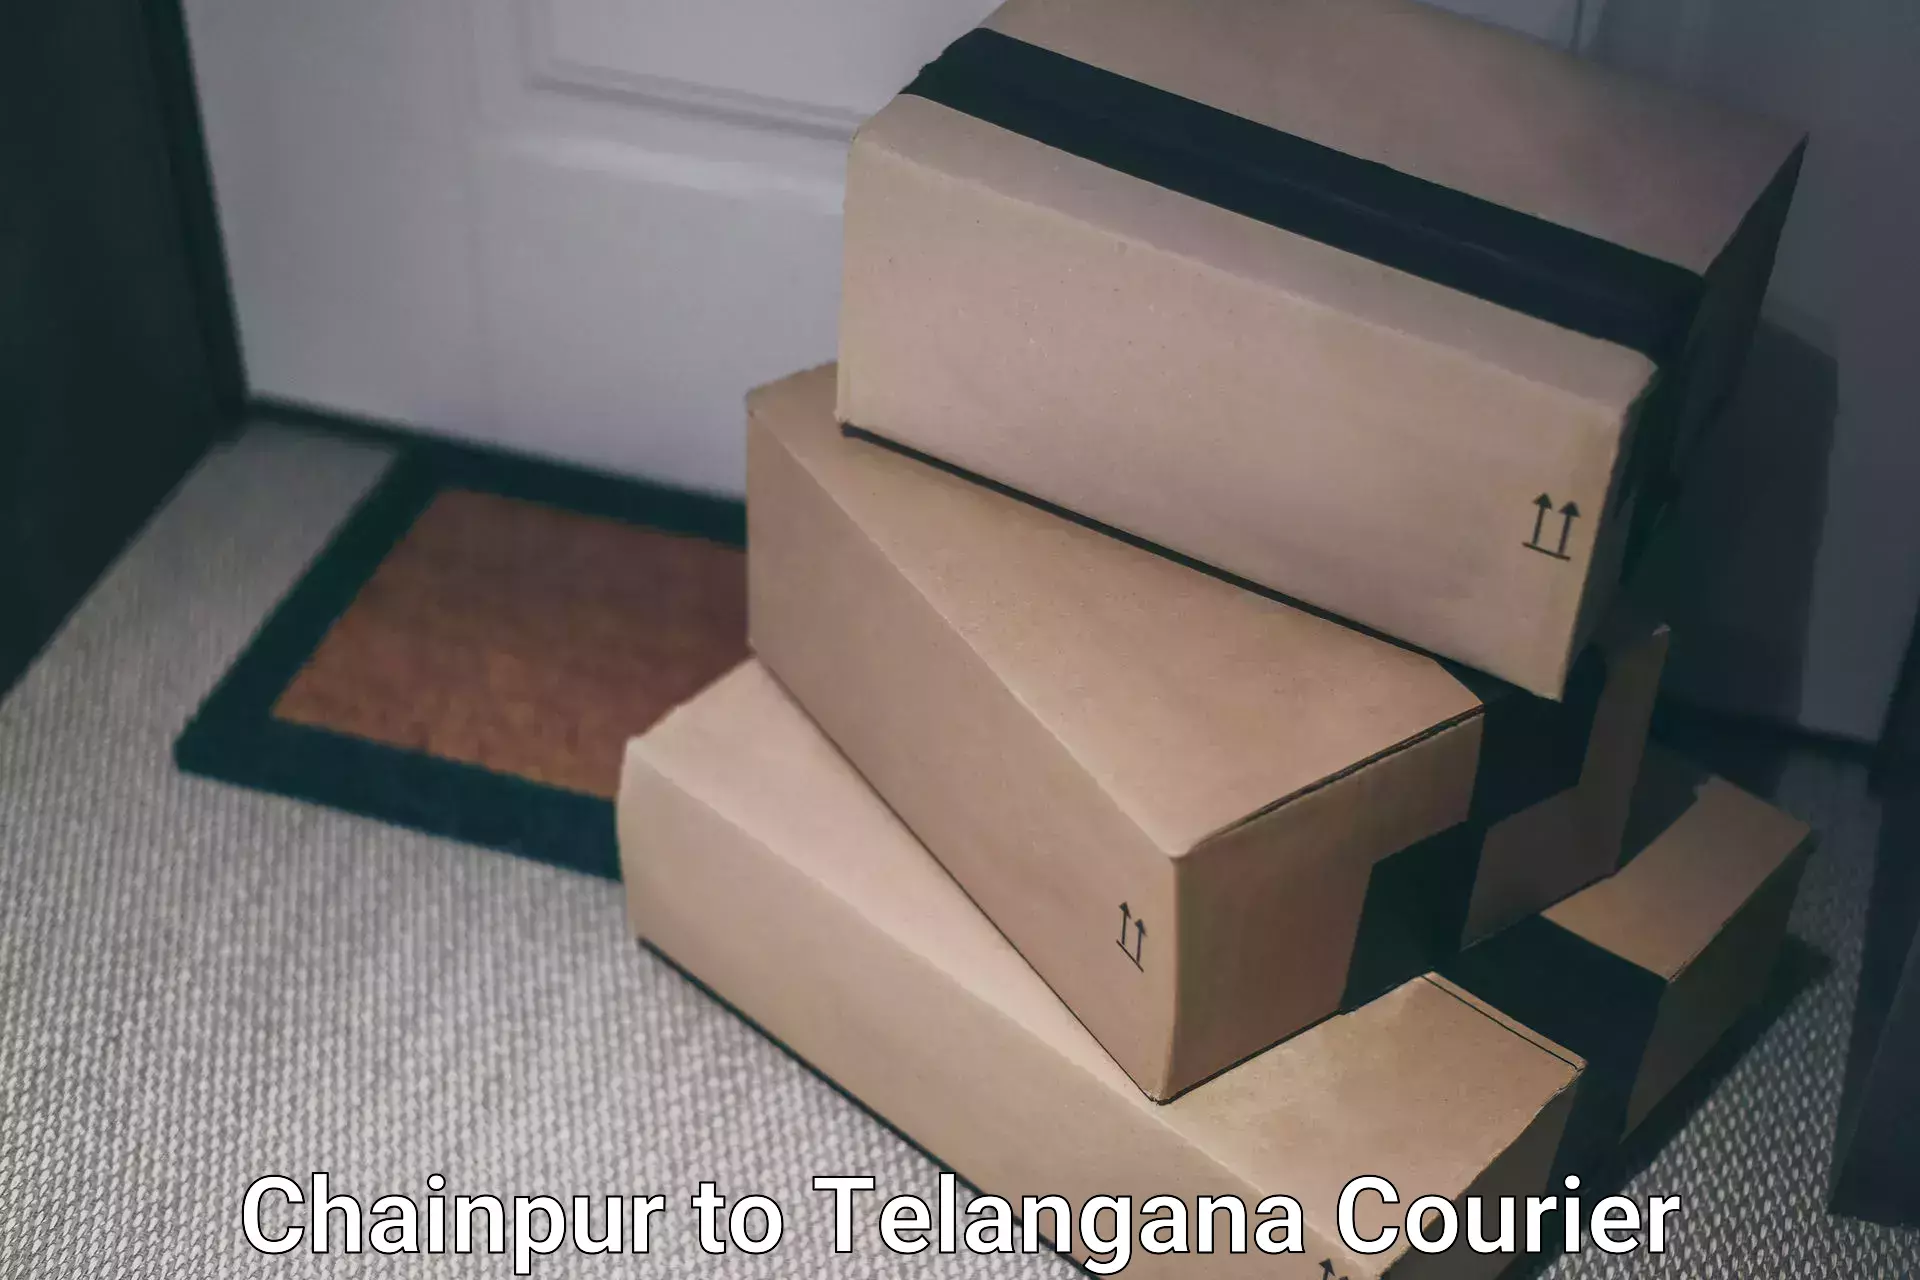 Courier insurance Chainpur to Hyderabad